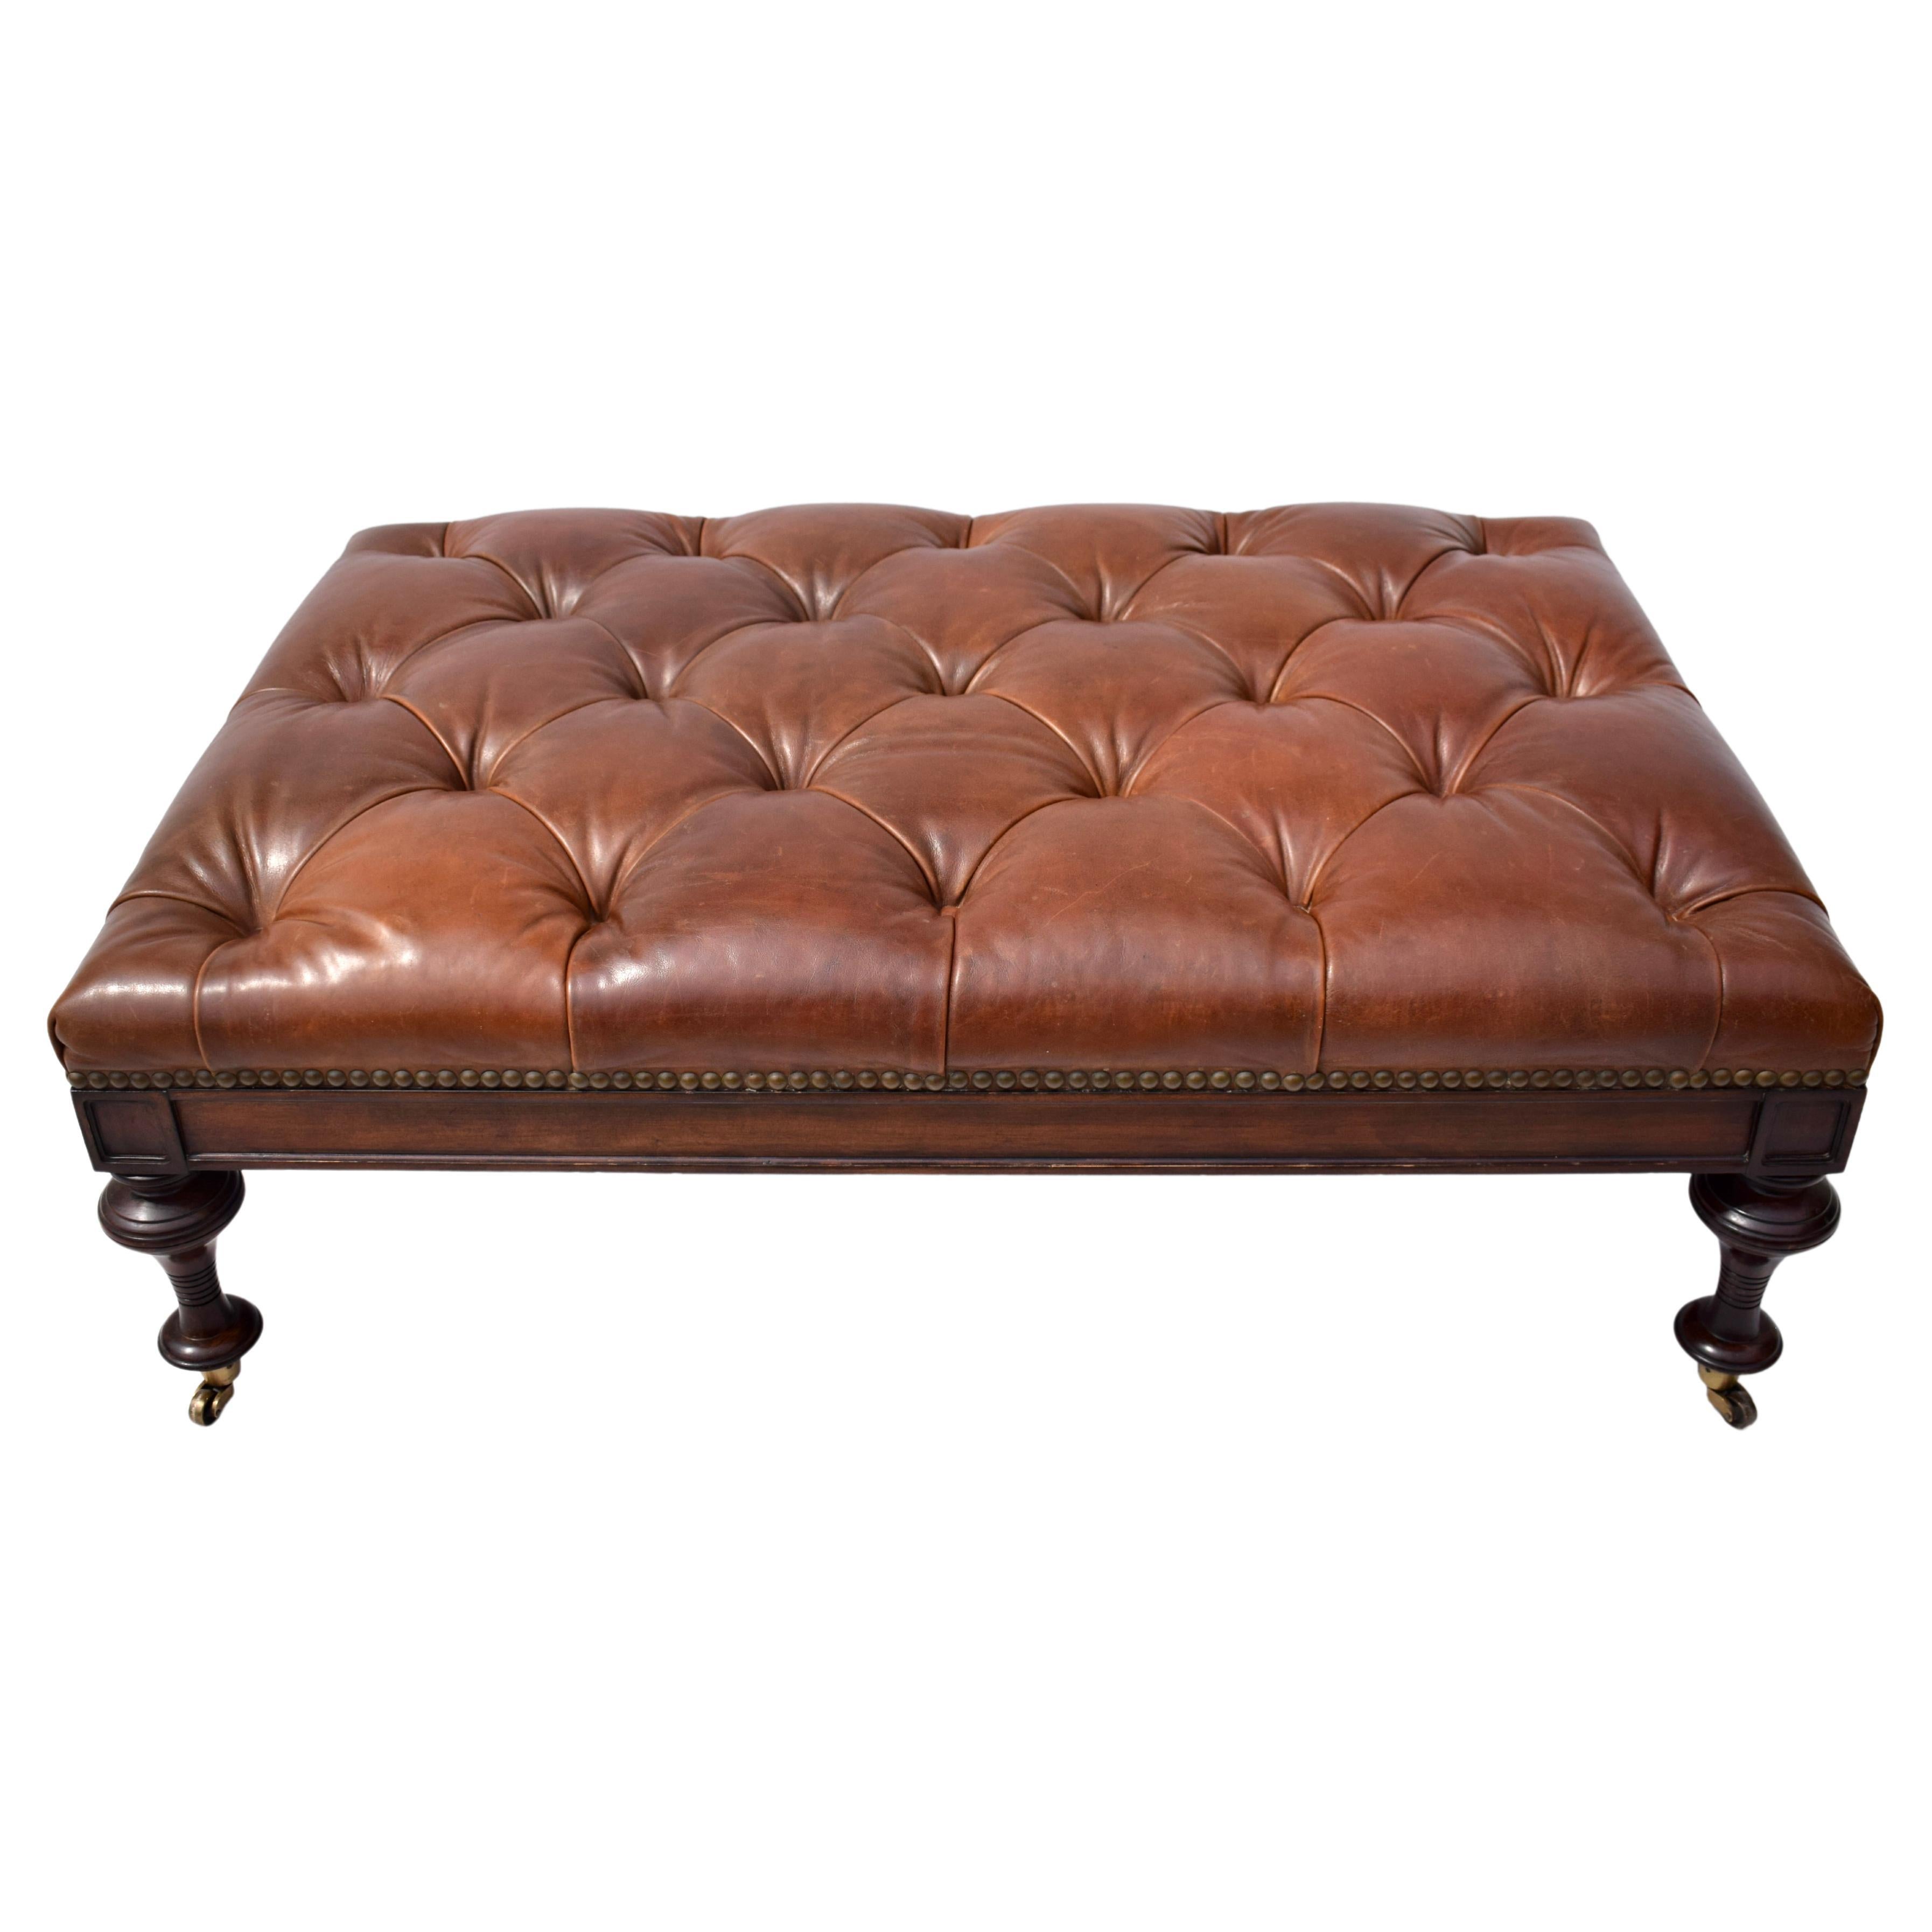 English Chesterfield Aniline leather tufted ottoman by Drexel Heritage featuring brass tack detailing with elegant turned legs on brass casters. Generous proportions with original tags.